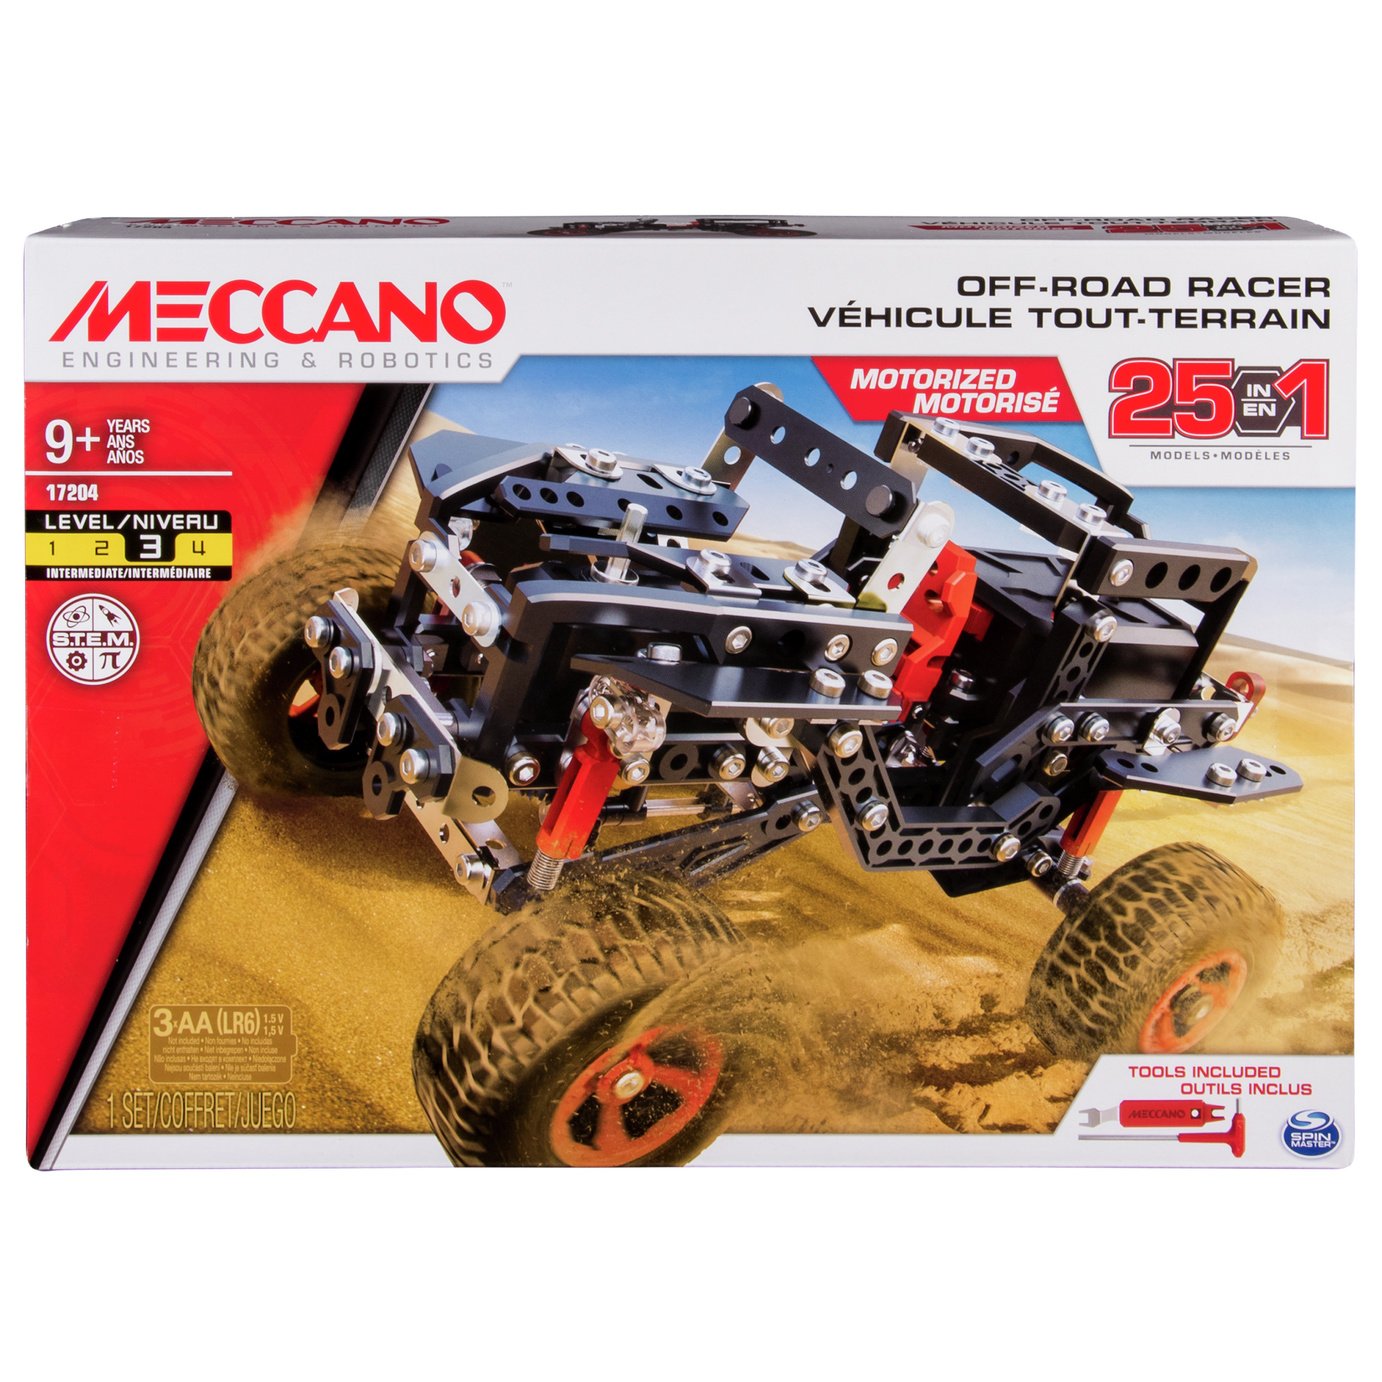 Meccano 25-in-1 Off-Road Racer Motorized Building Set